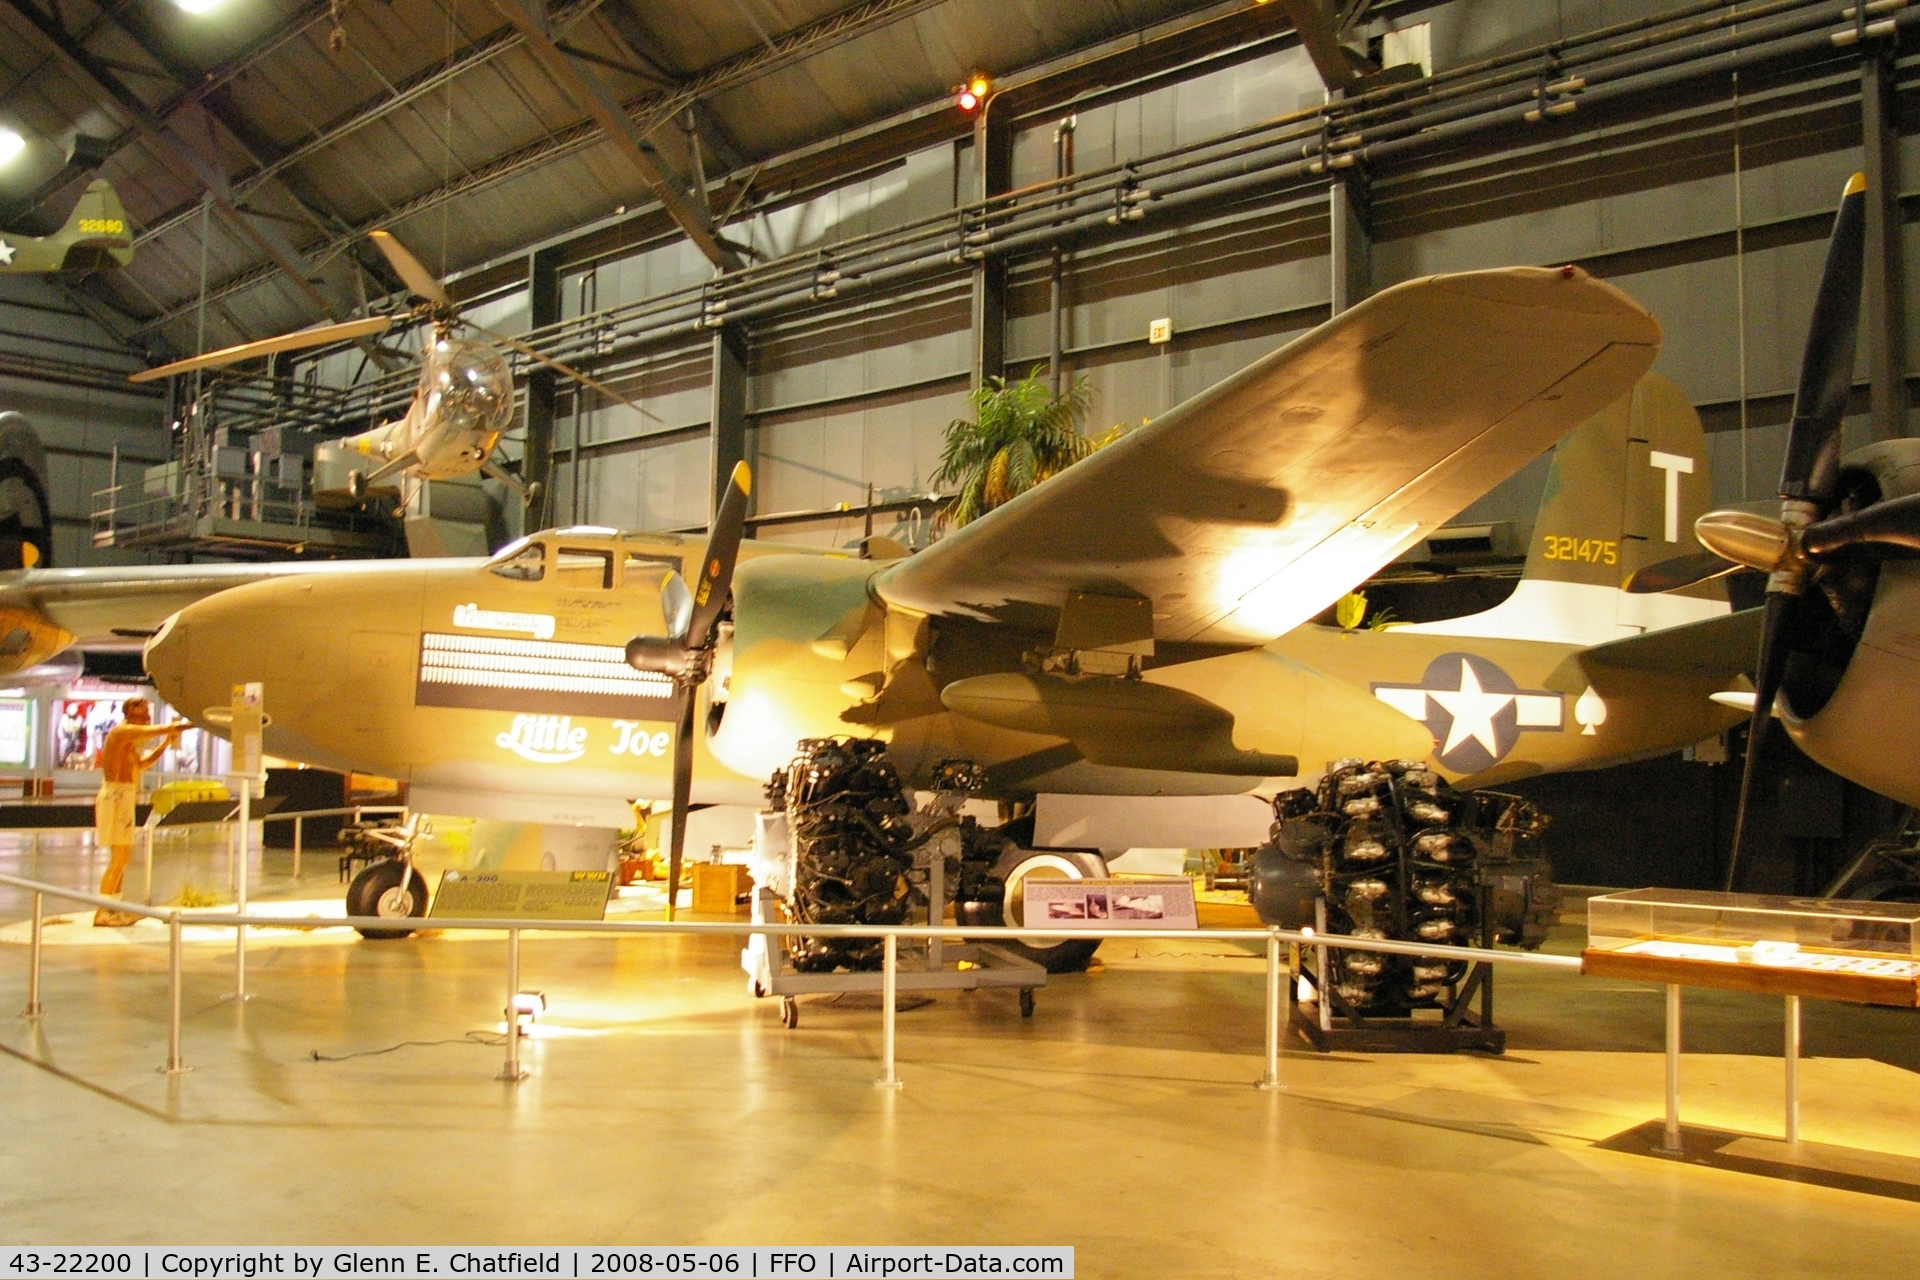 43-22200, 1943 Douglas A-20G Havoc C/N 21847, At the National Museum of the U.S. Air Force